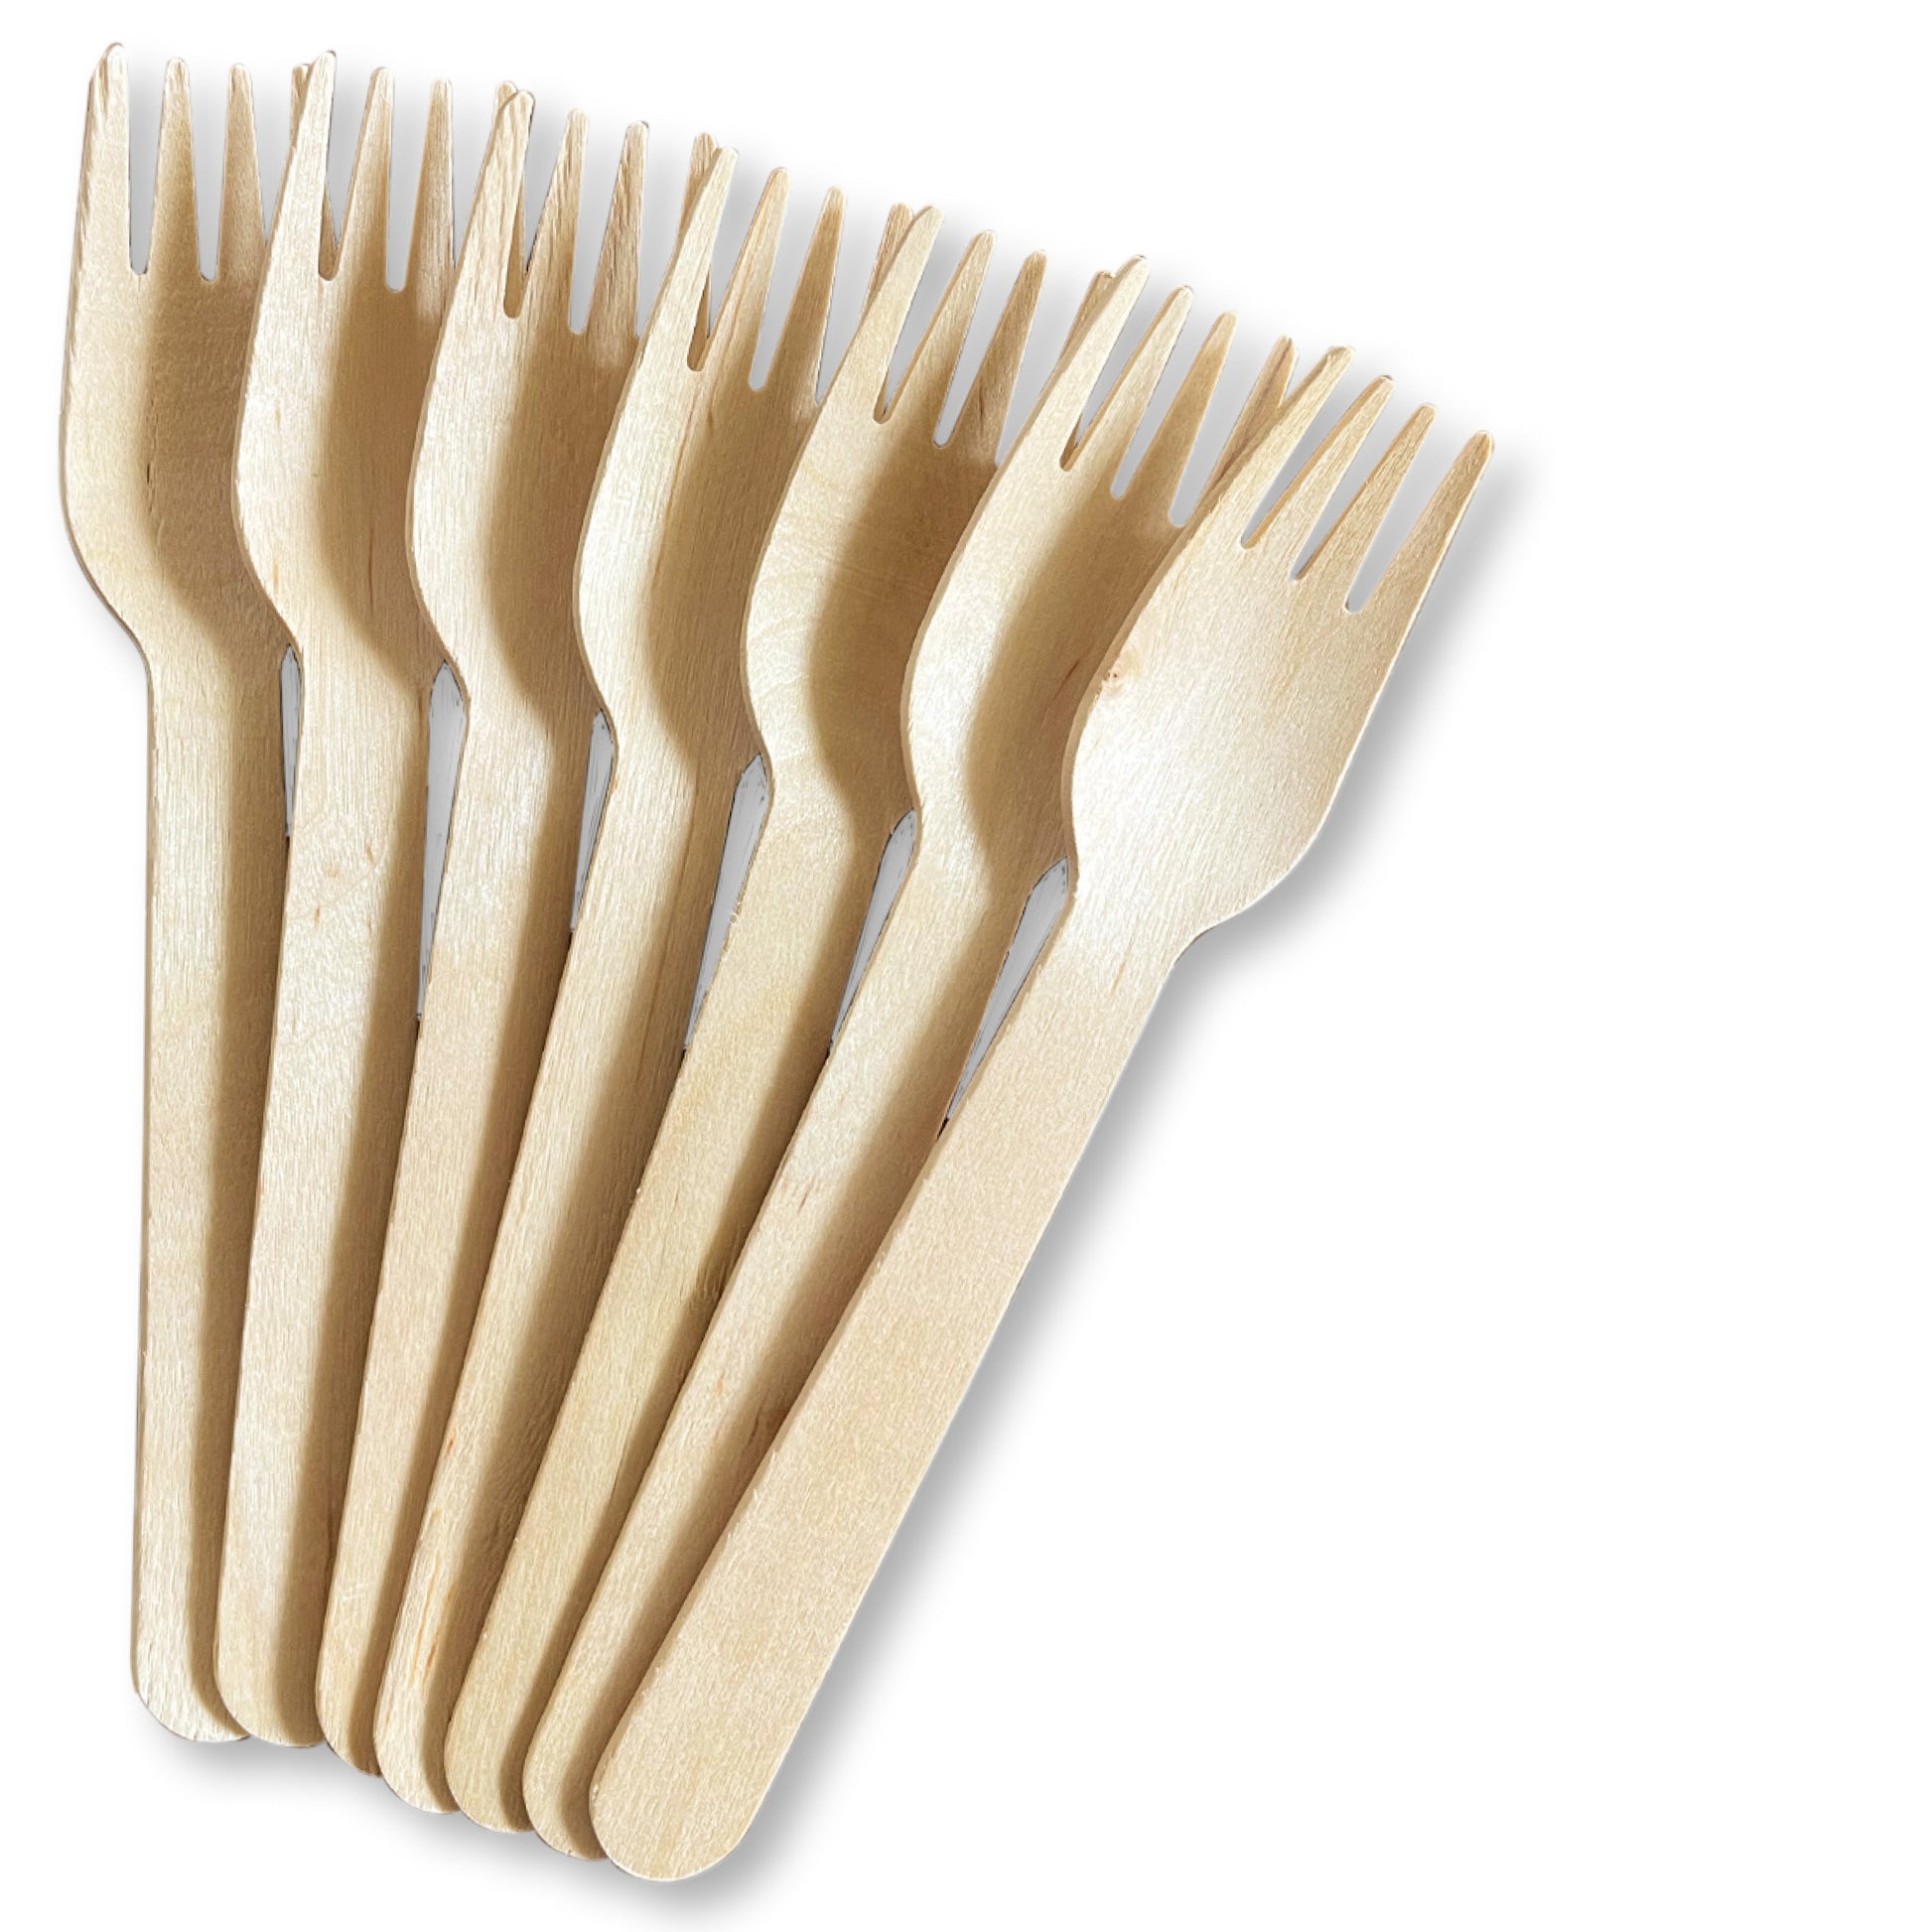 Stylish Disposable cutlery in natural BIRCH, Knives, forks and spoons from Palm Leaf Plates here in New Zealand